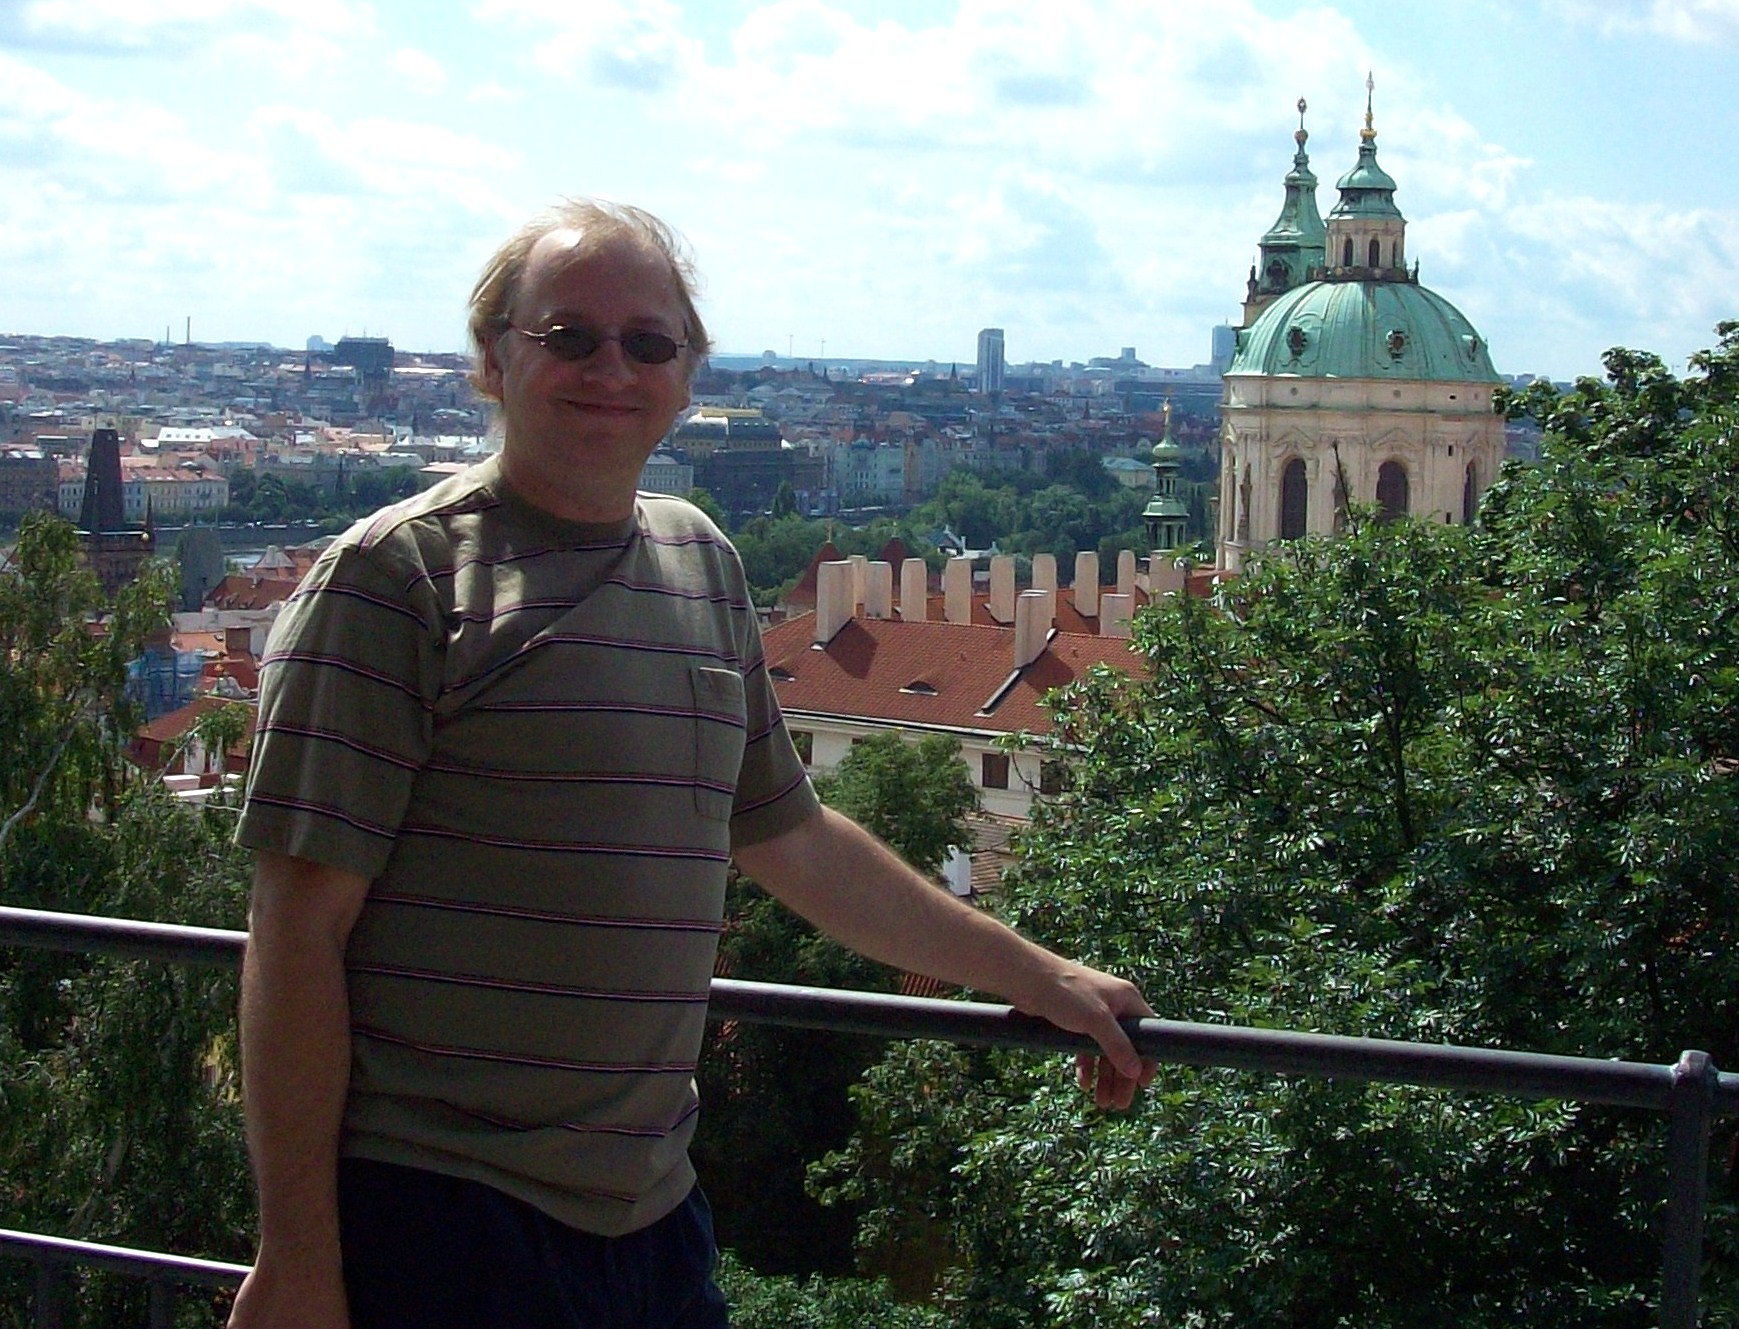 Stephen Donnelly, literary research trip, Czech Republic, July 7, 2009.